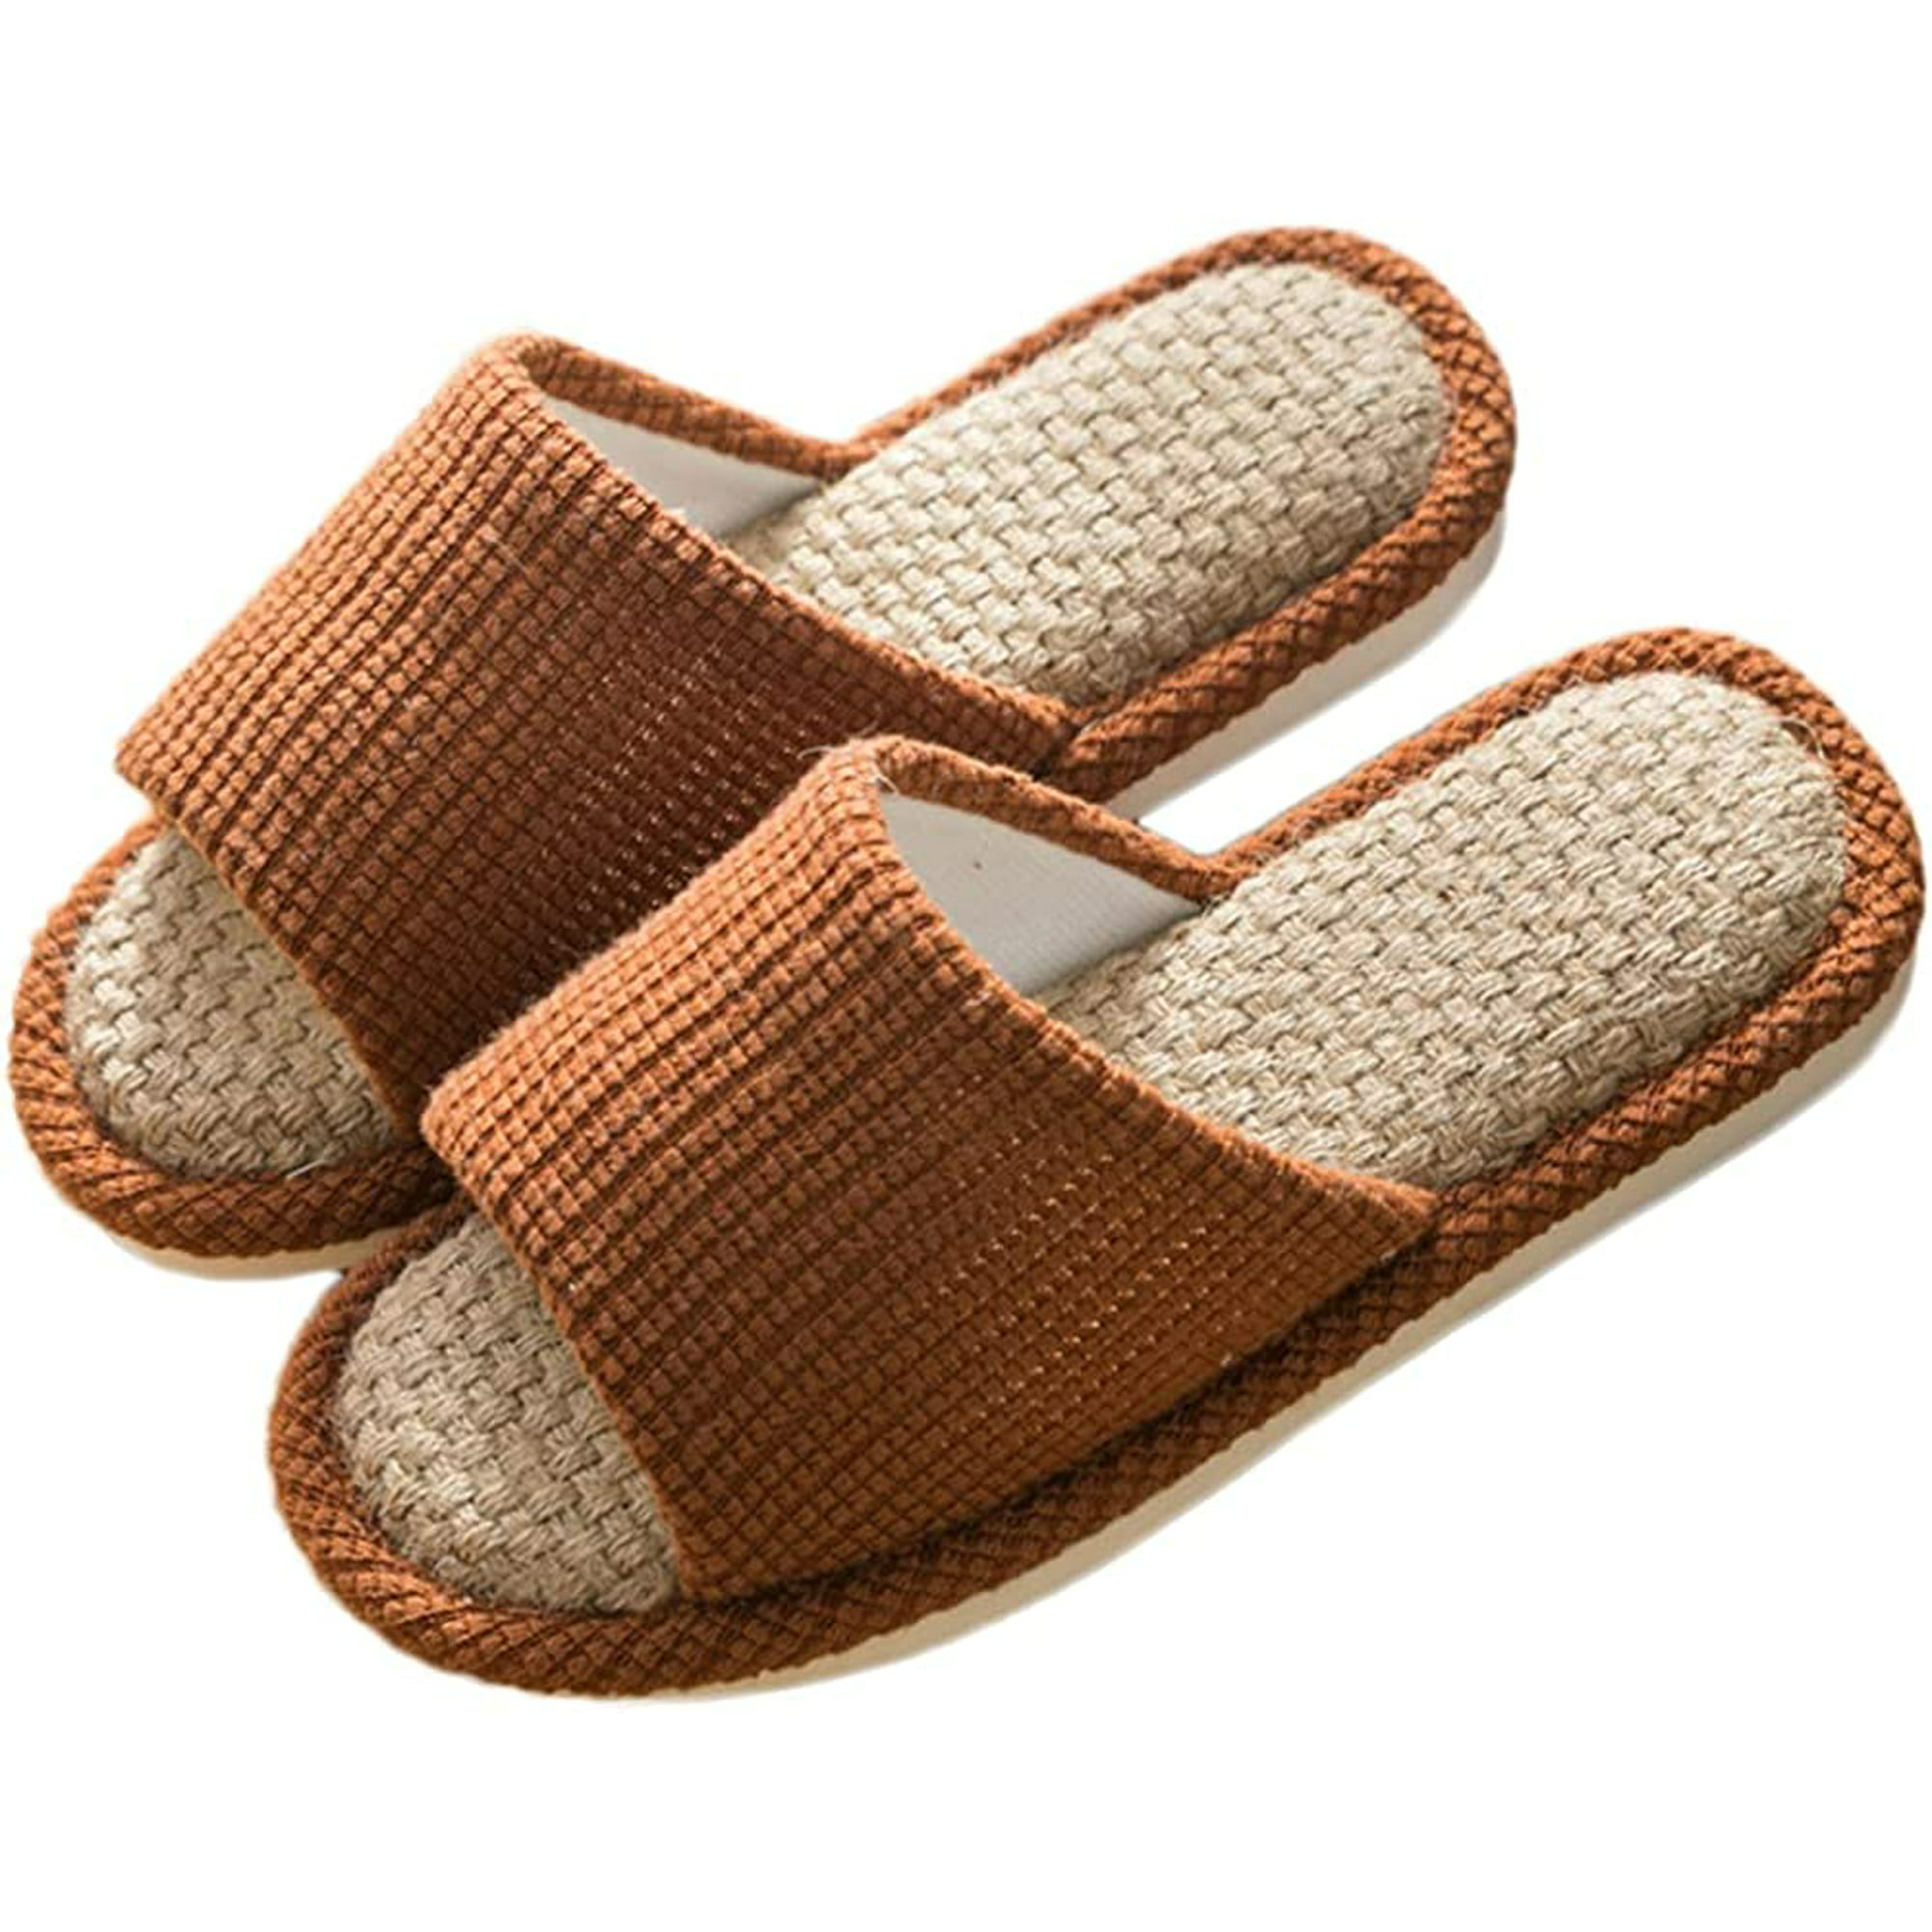 PIKADINGNIS Summer House Slippers for Women and Cool Comfy Open Toe Home Cotton Linen Slides Bedroom Light Shoes Indoor or Outdoor - Walmart.com